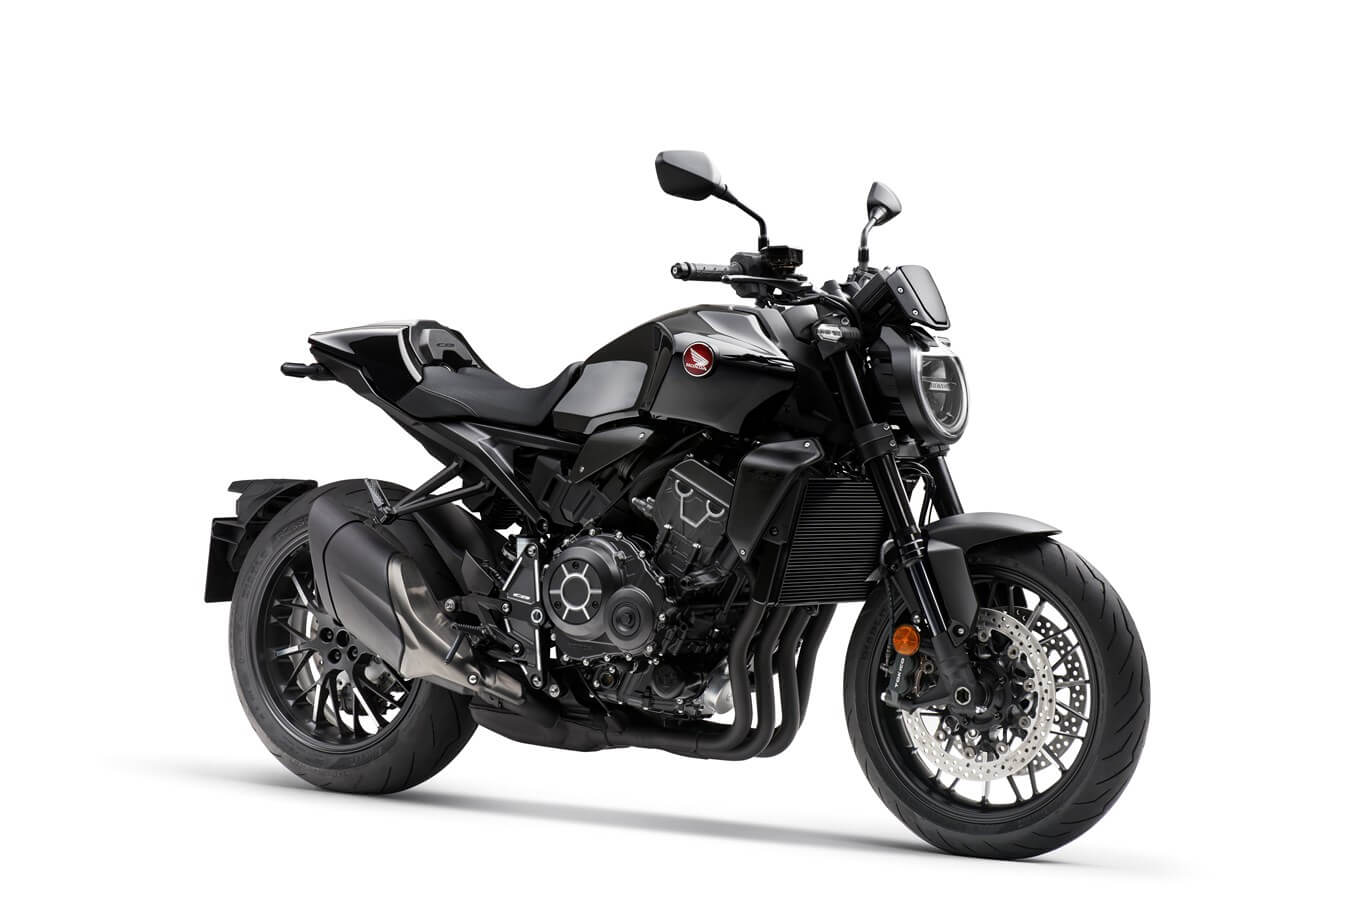 2021 Honda CB1000R Black Edition Review / Specs + New Changes Explained | Neo Sports Cafe Motorcycle